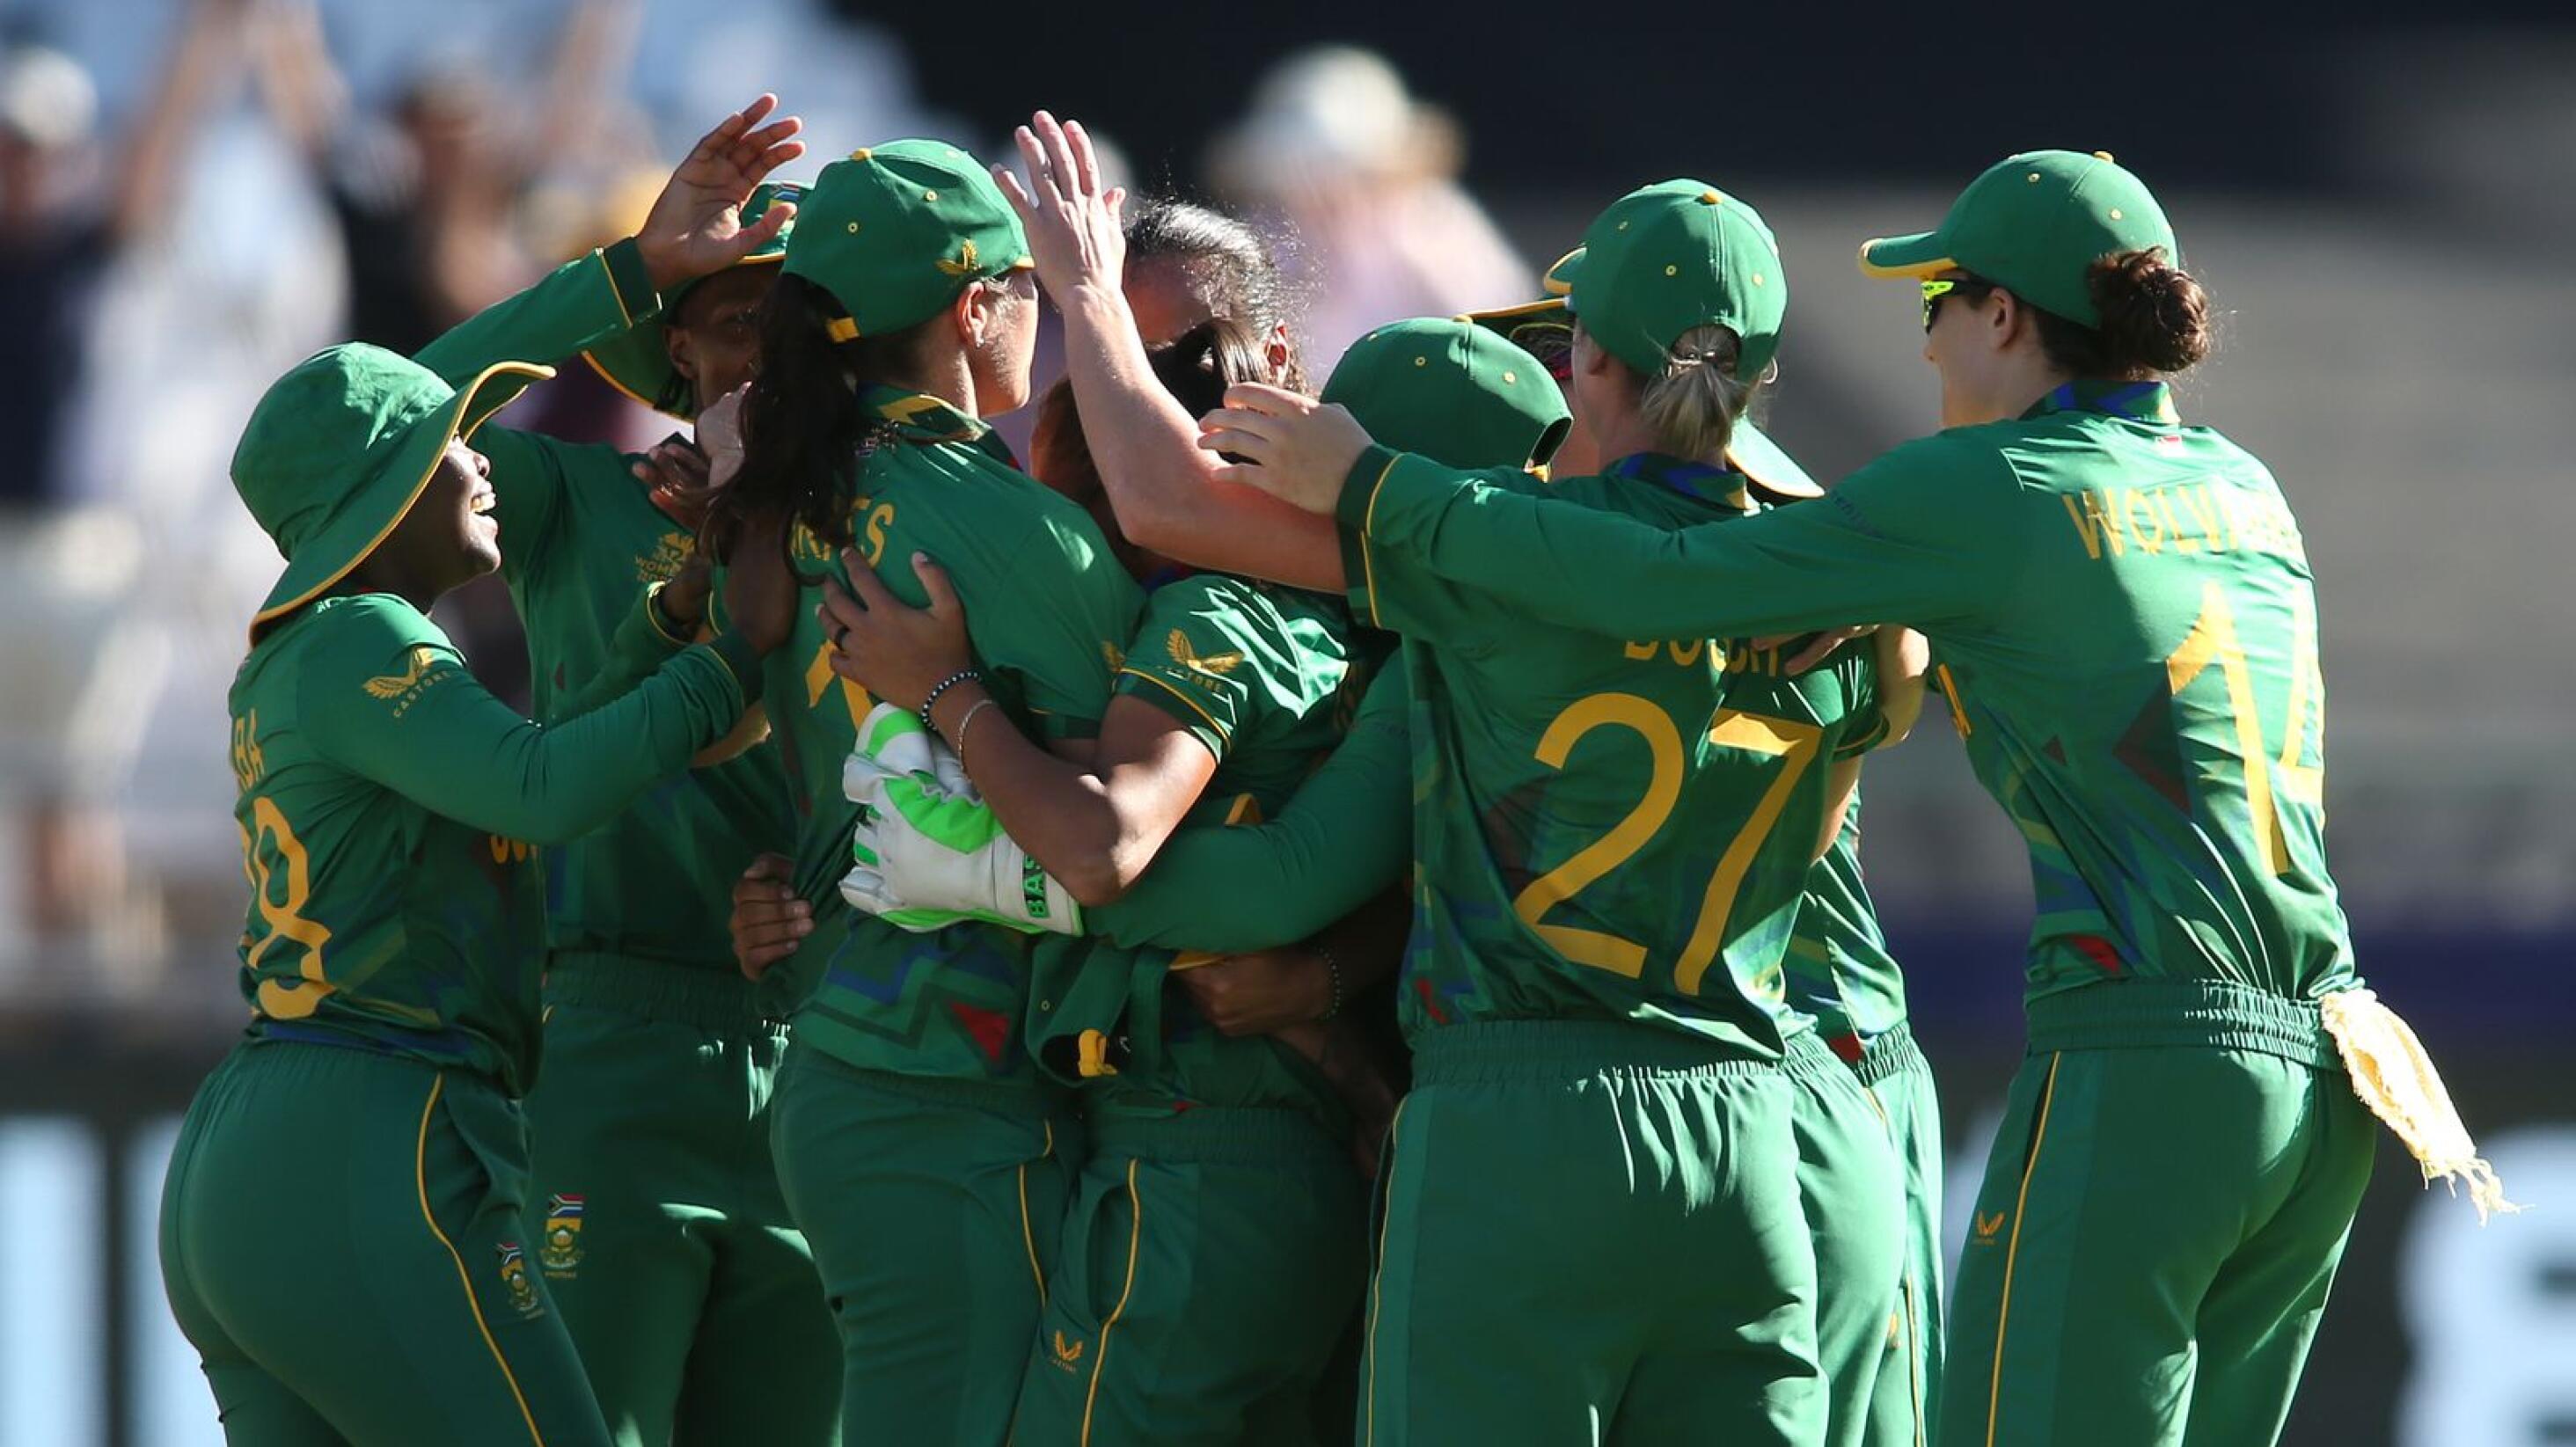 The Proteas celebrated after picking up the wicket of Alice Capsey of England during their ICC Women's T20 World Cup semi-final at Newlands Cricket Ground in Cape Town on Friday